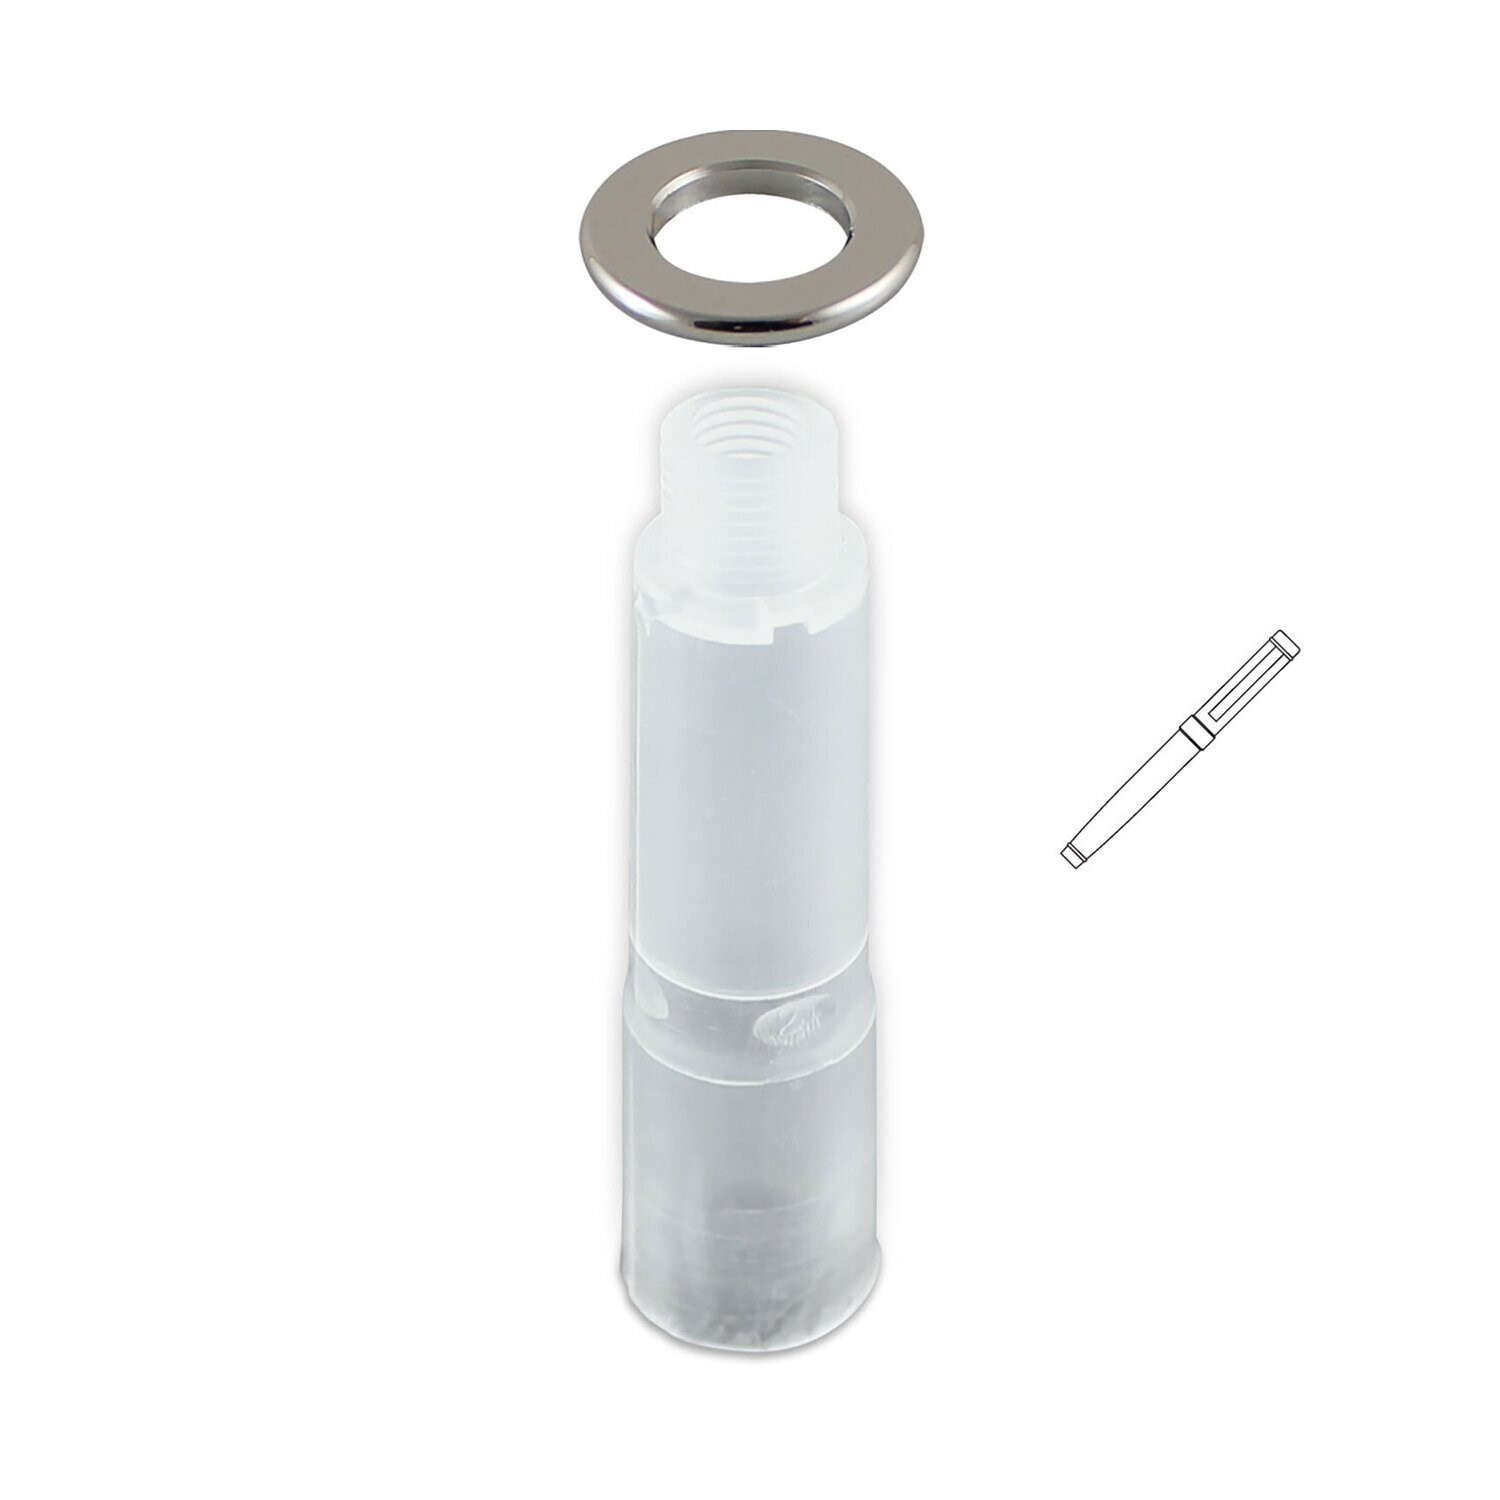 Acme Pushoff & Chrome Washer For Standard Flat-Top Roller Ball Pens ZPPUSHOFFWF